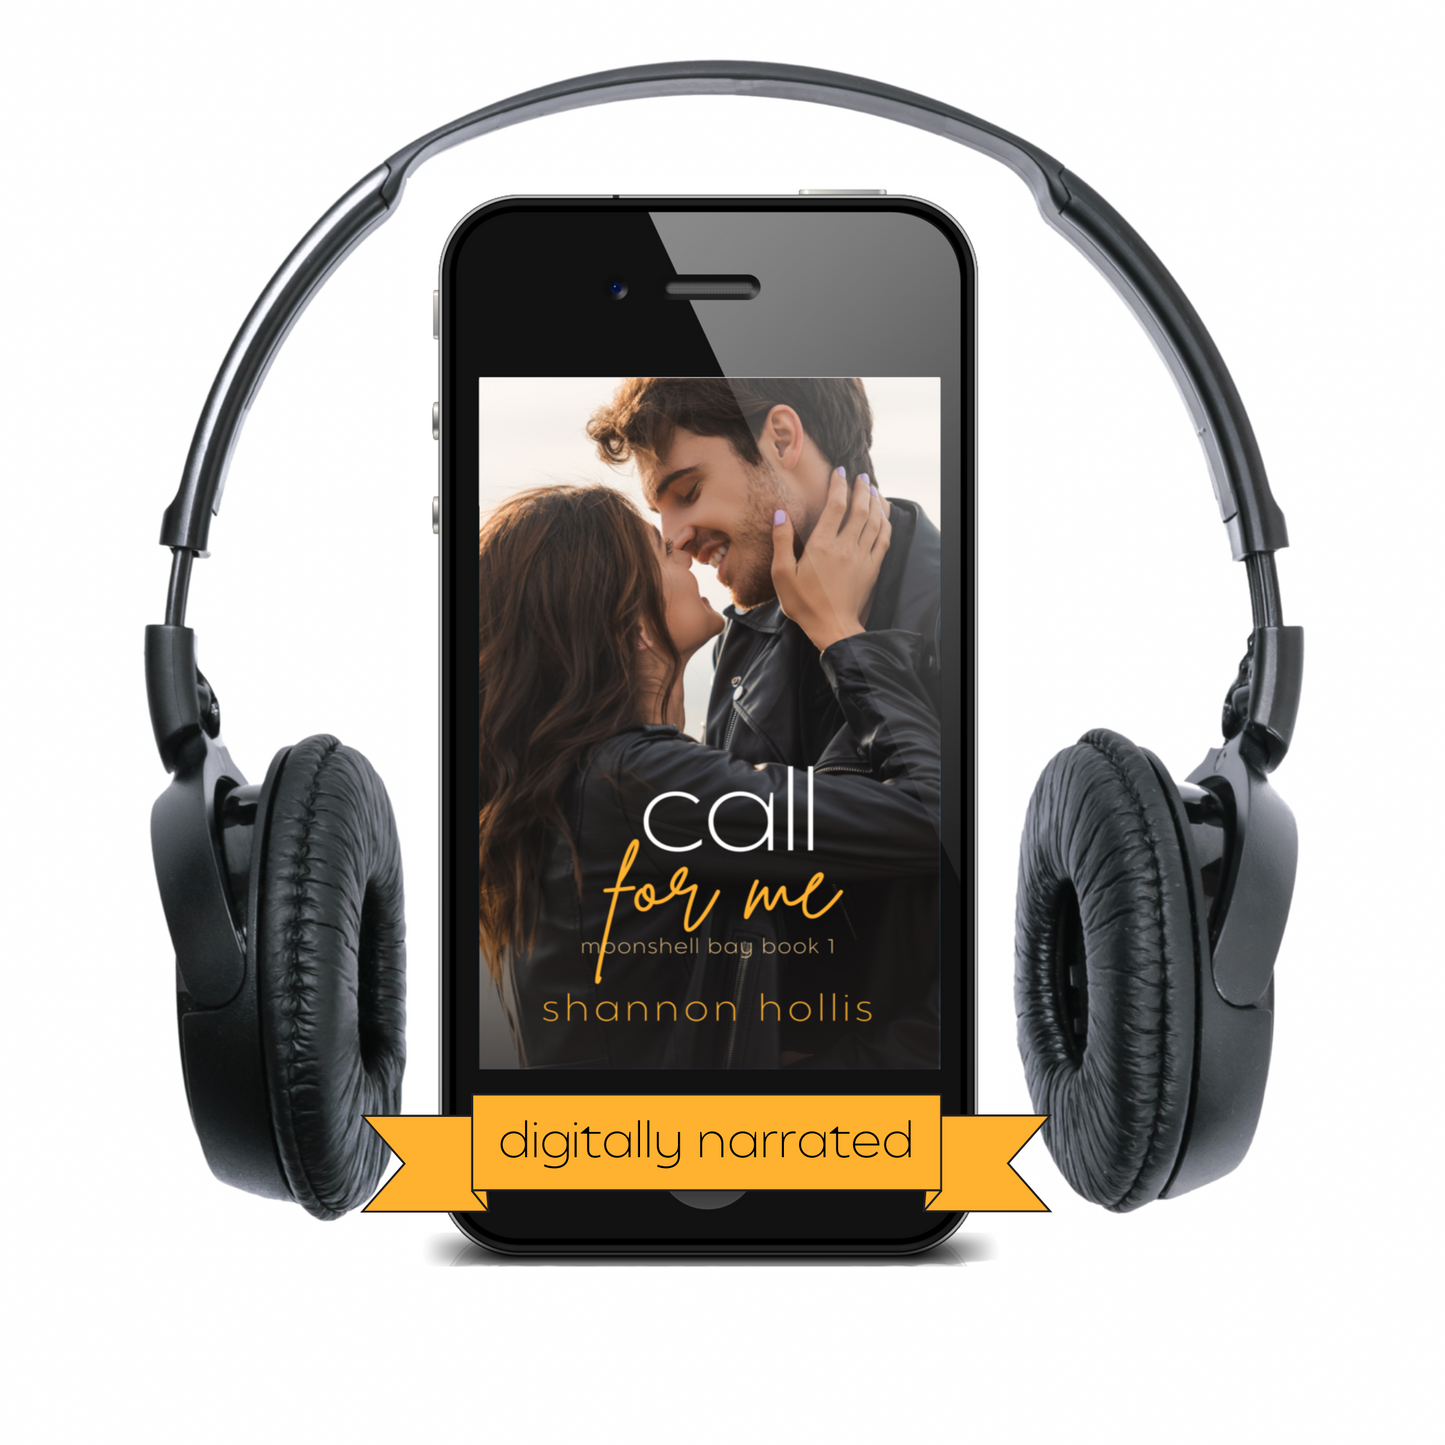 Call for Me, a digitally narrated audiobook written by Shannon Hollis